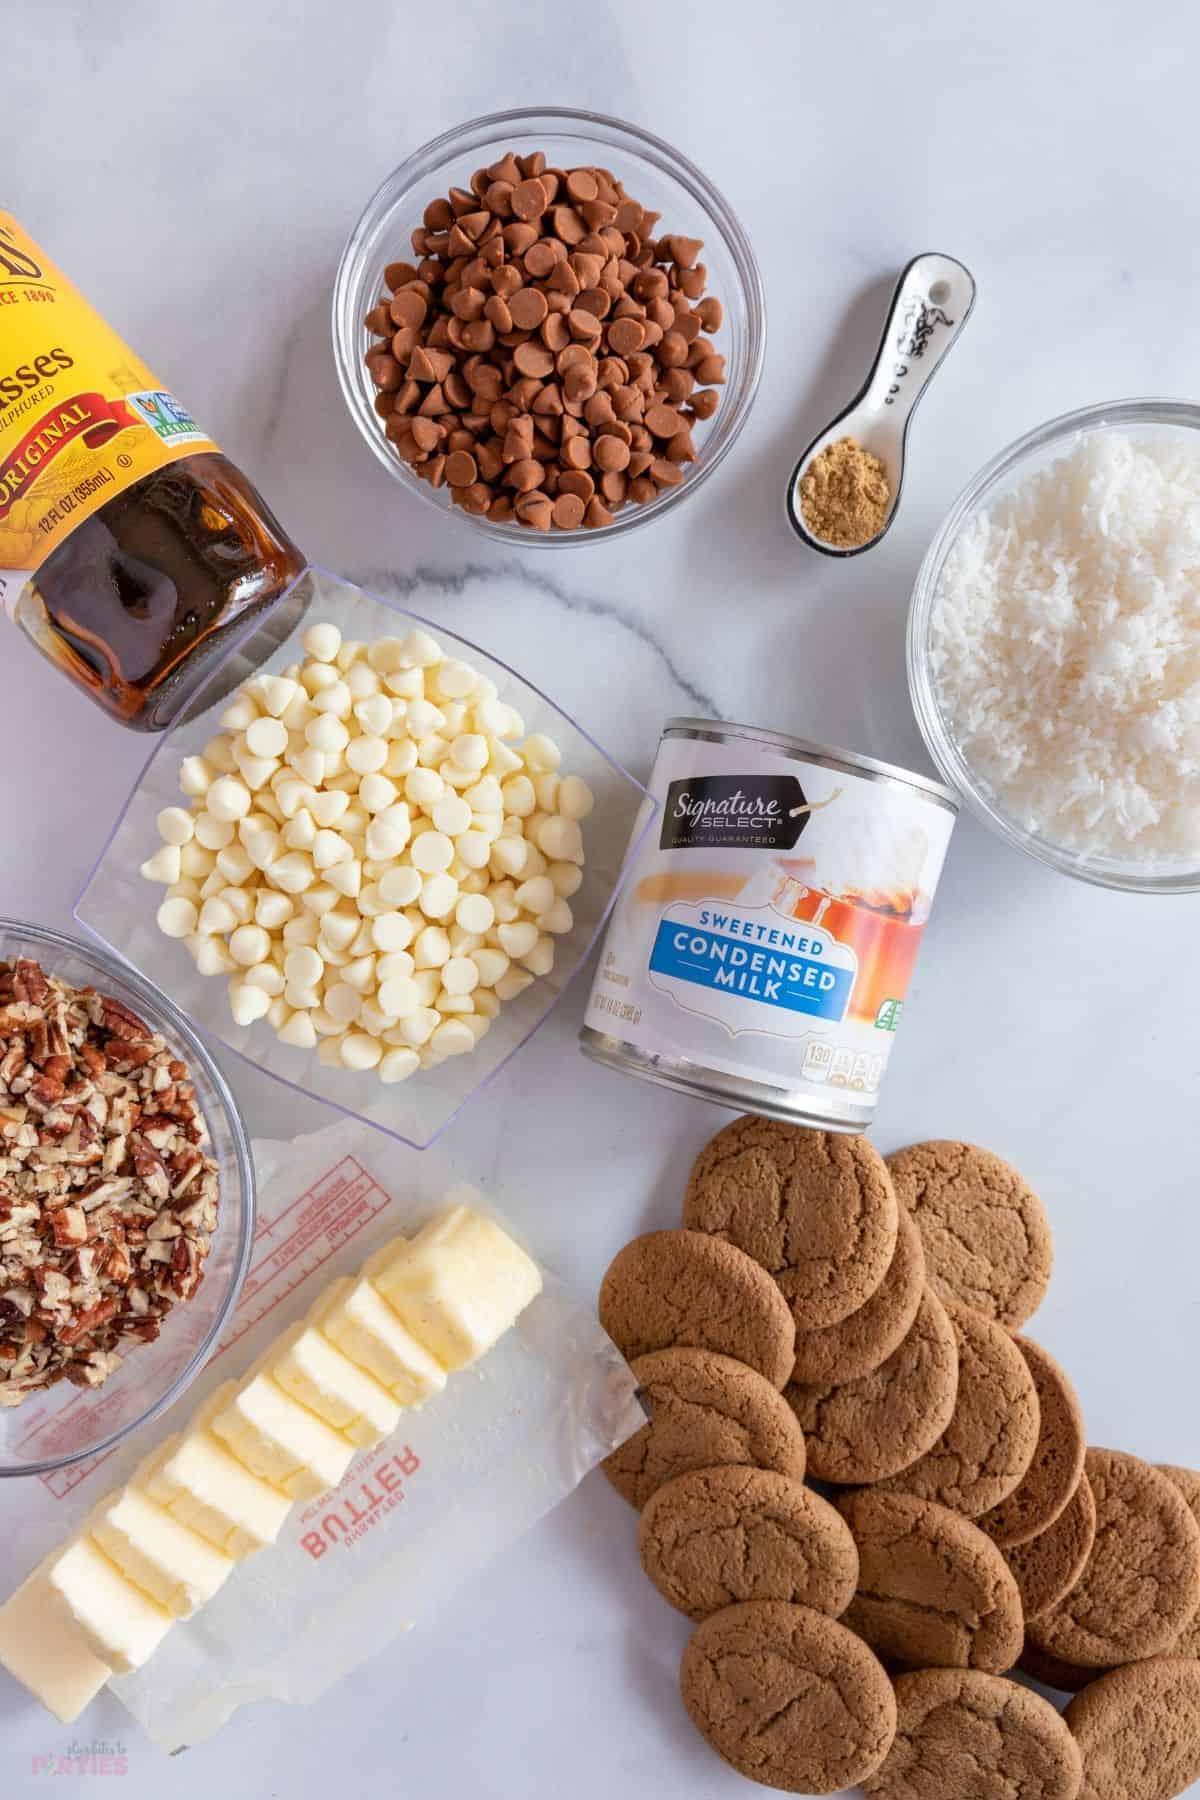 Ingredients on a marble surface include molasses, white chocolate chips, cinnamon chips, ginger, condensed milk, coconut, butter, pecans, and gingersnaps.